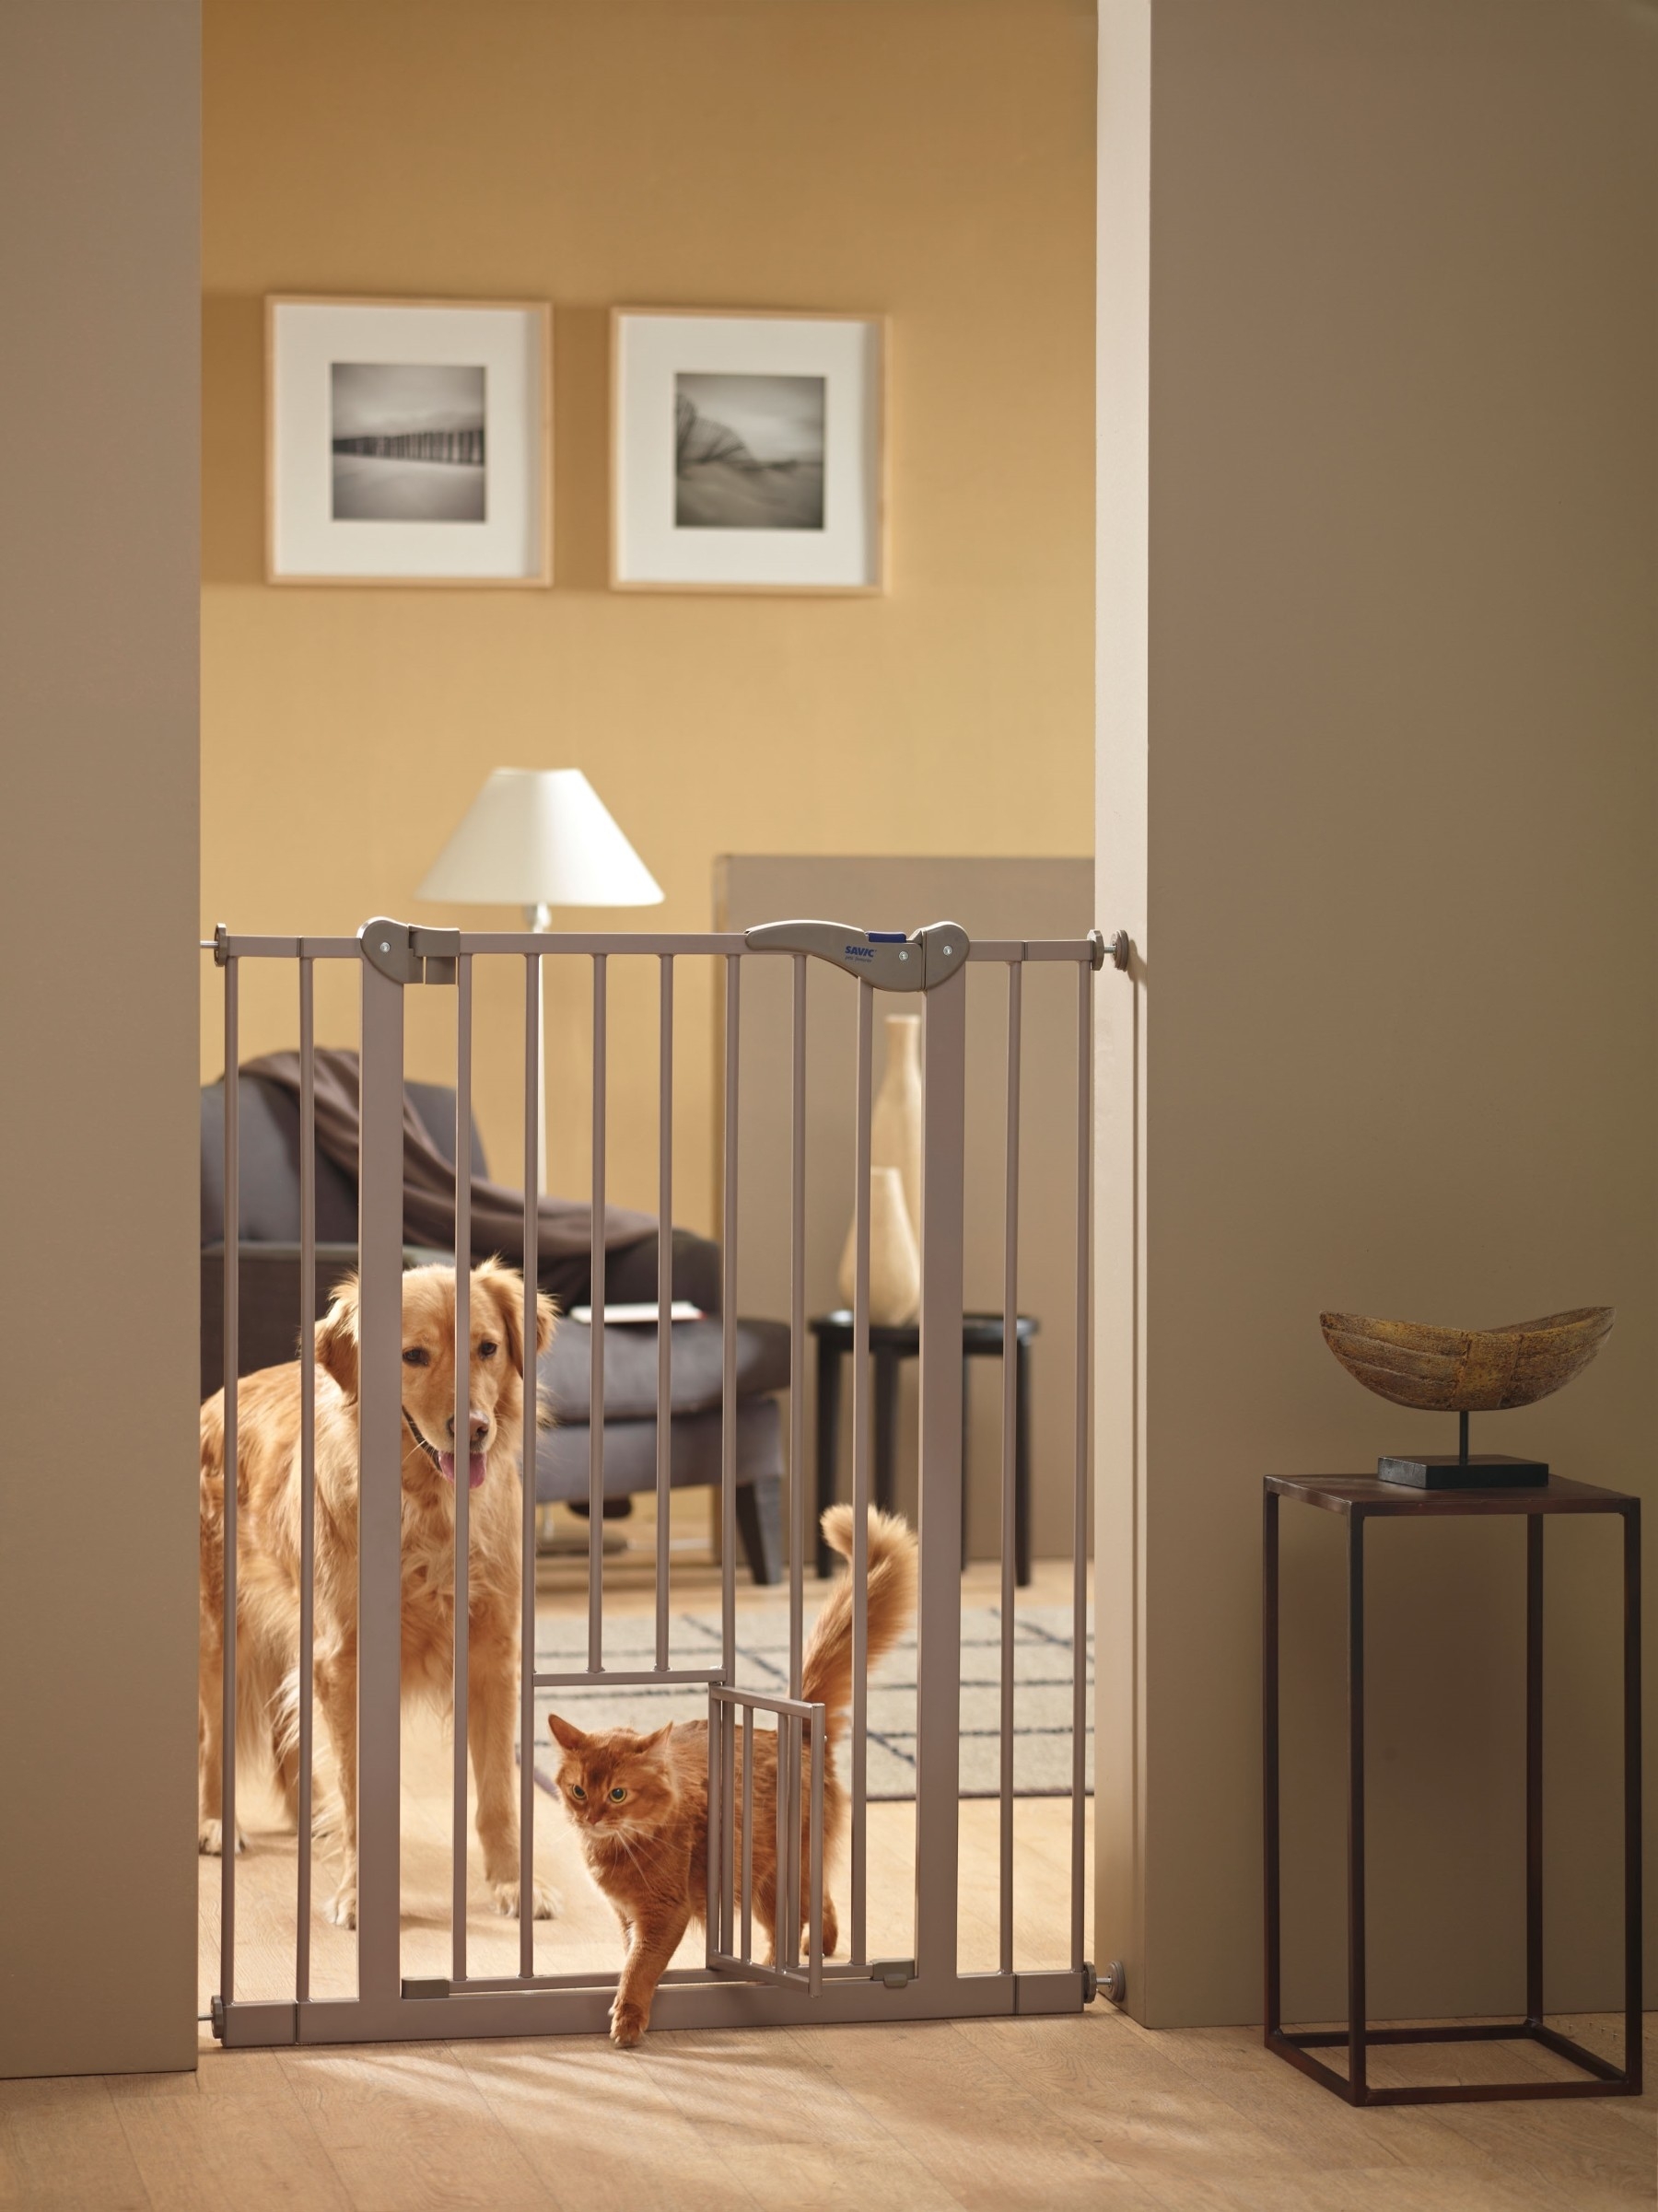 stair gates with cat flaps in